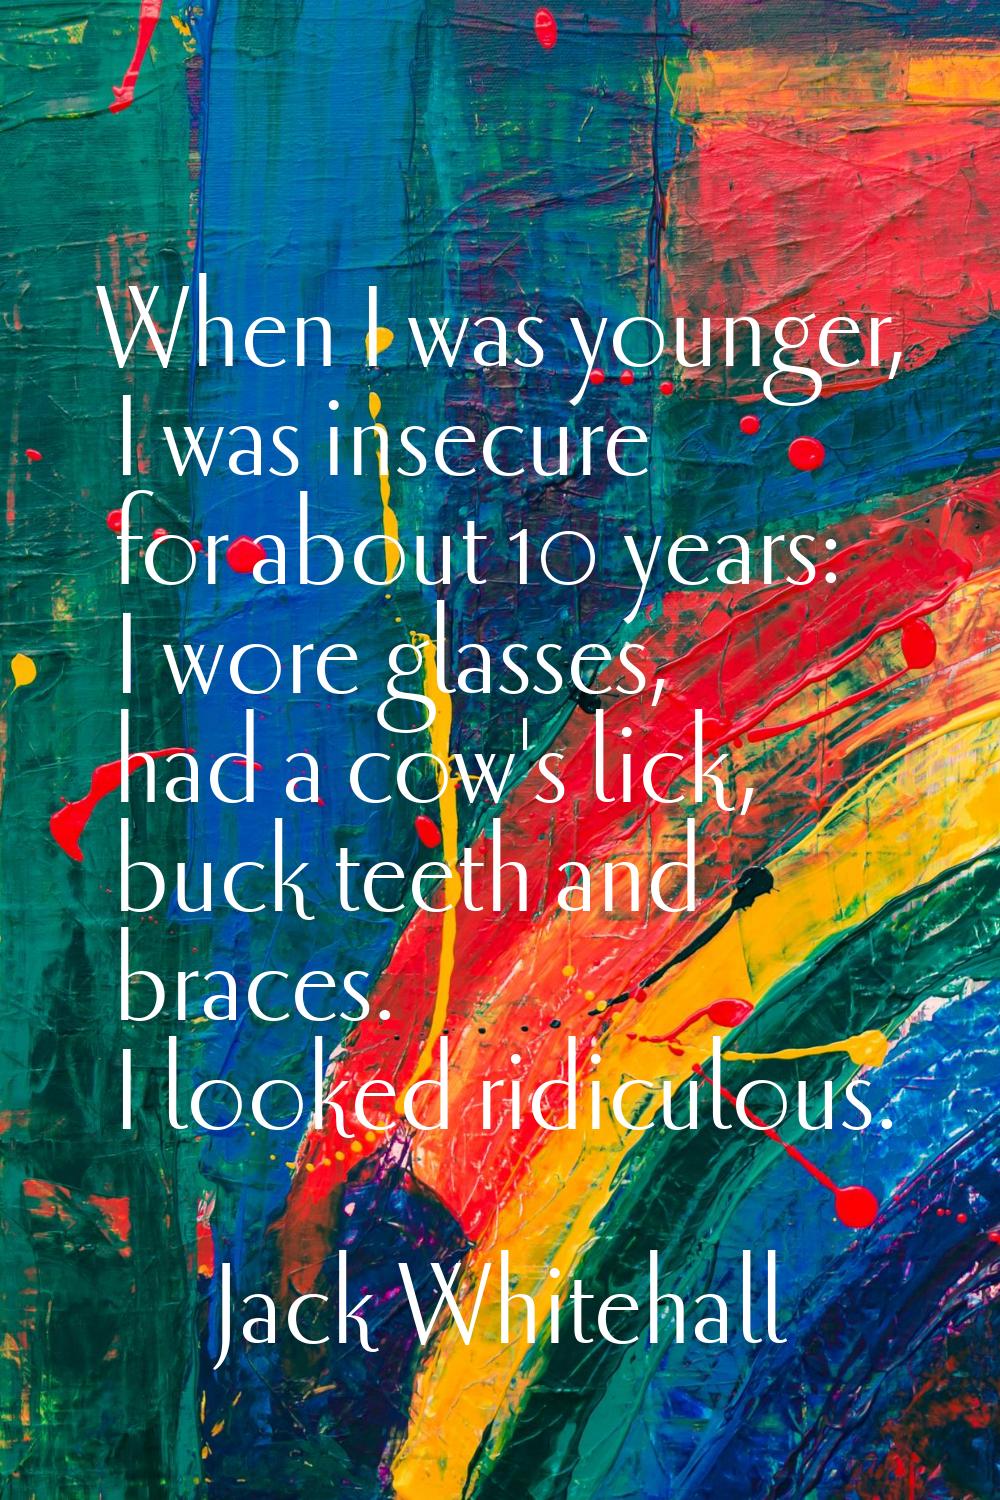 When I was younger, I was insecure for about 10 years: I wore glasses, had a cow's lick, buck teeth